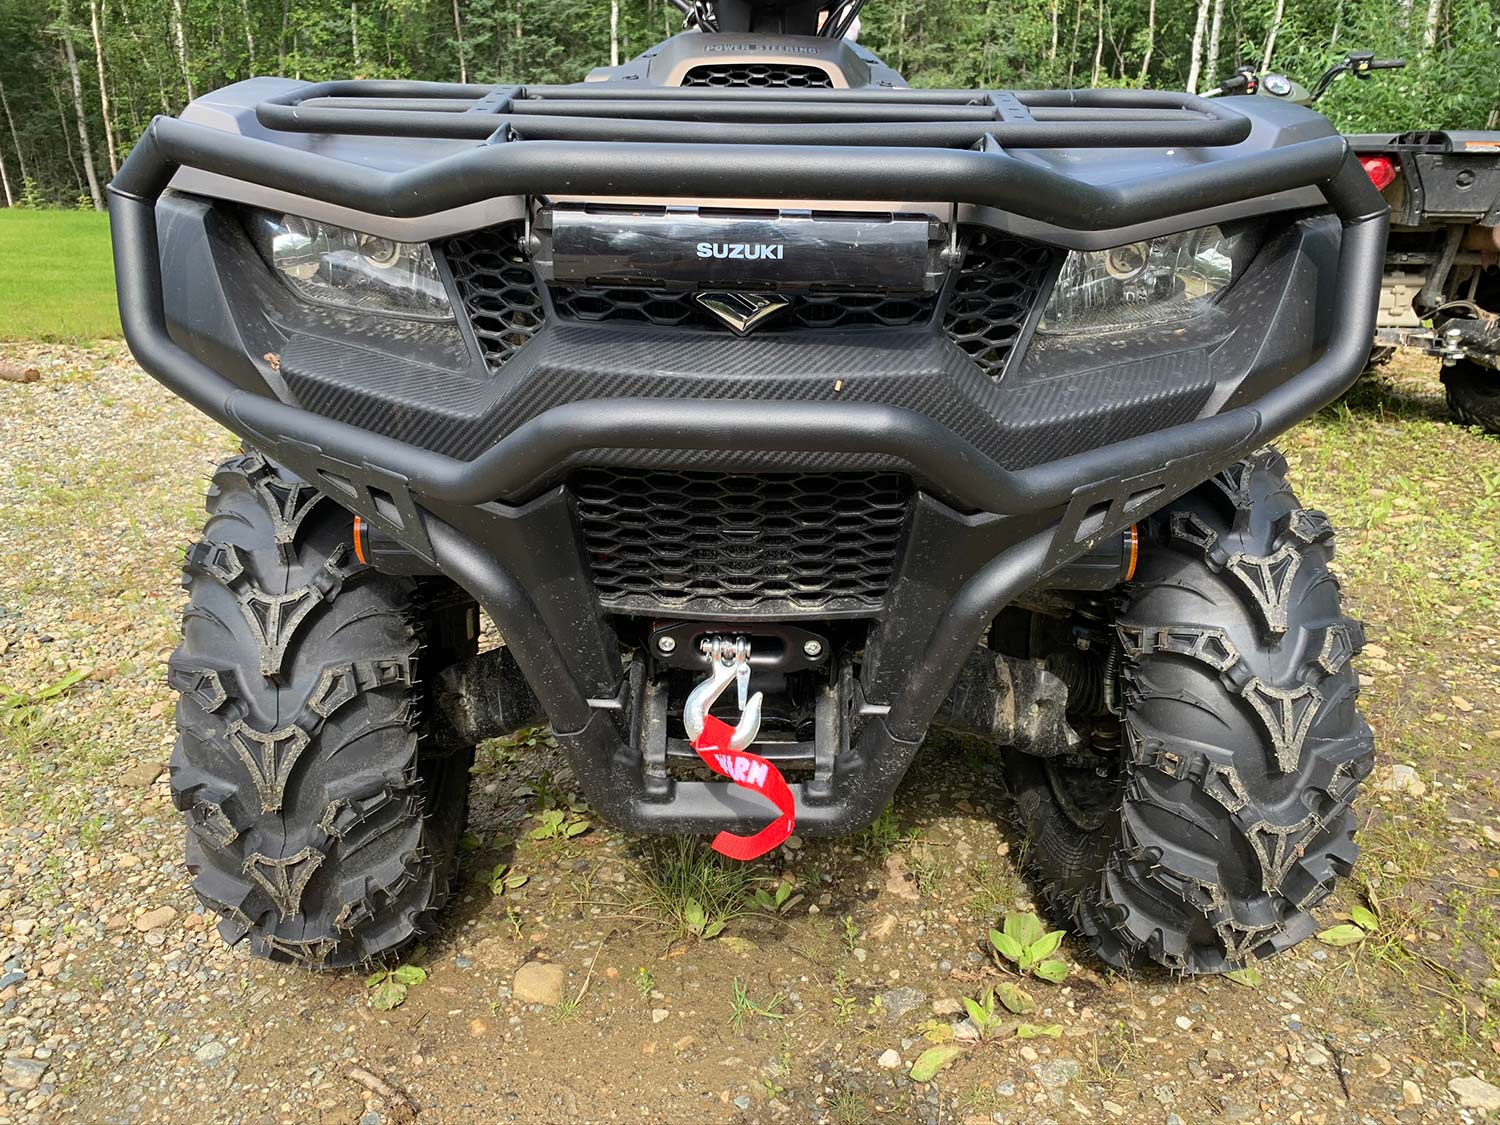 The front of a Suzuki four-wheeler ATV equipped with bumpers and a winch.